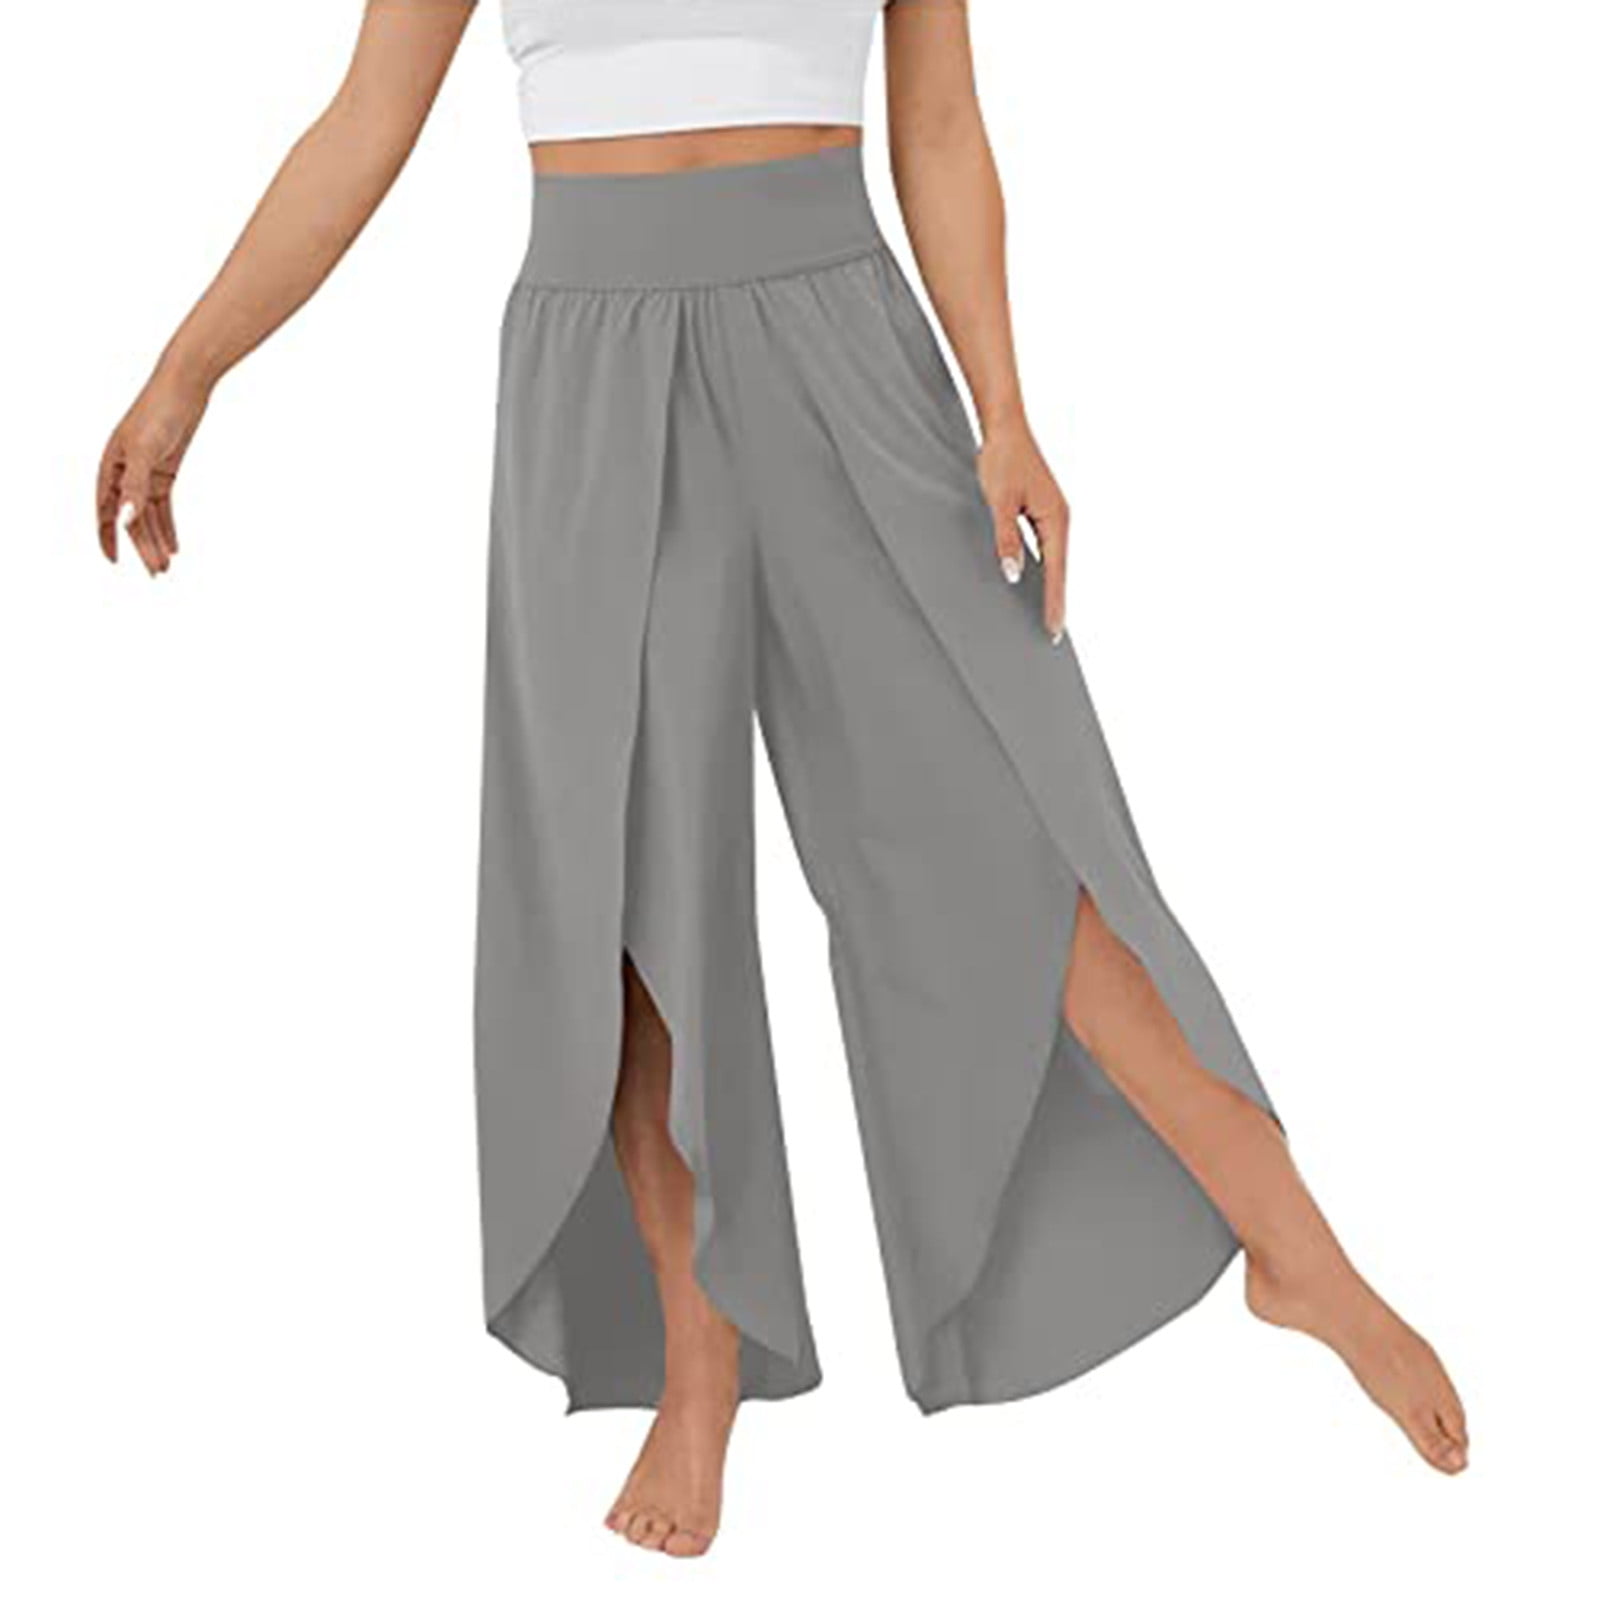 Buy Palazzo Pants for Girls Online At 30% Off - Go Colors